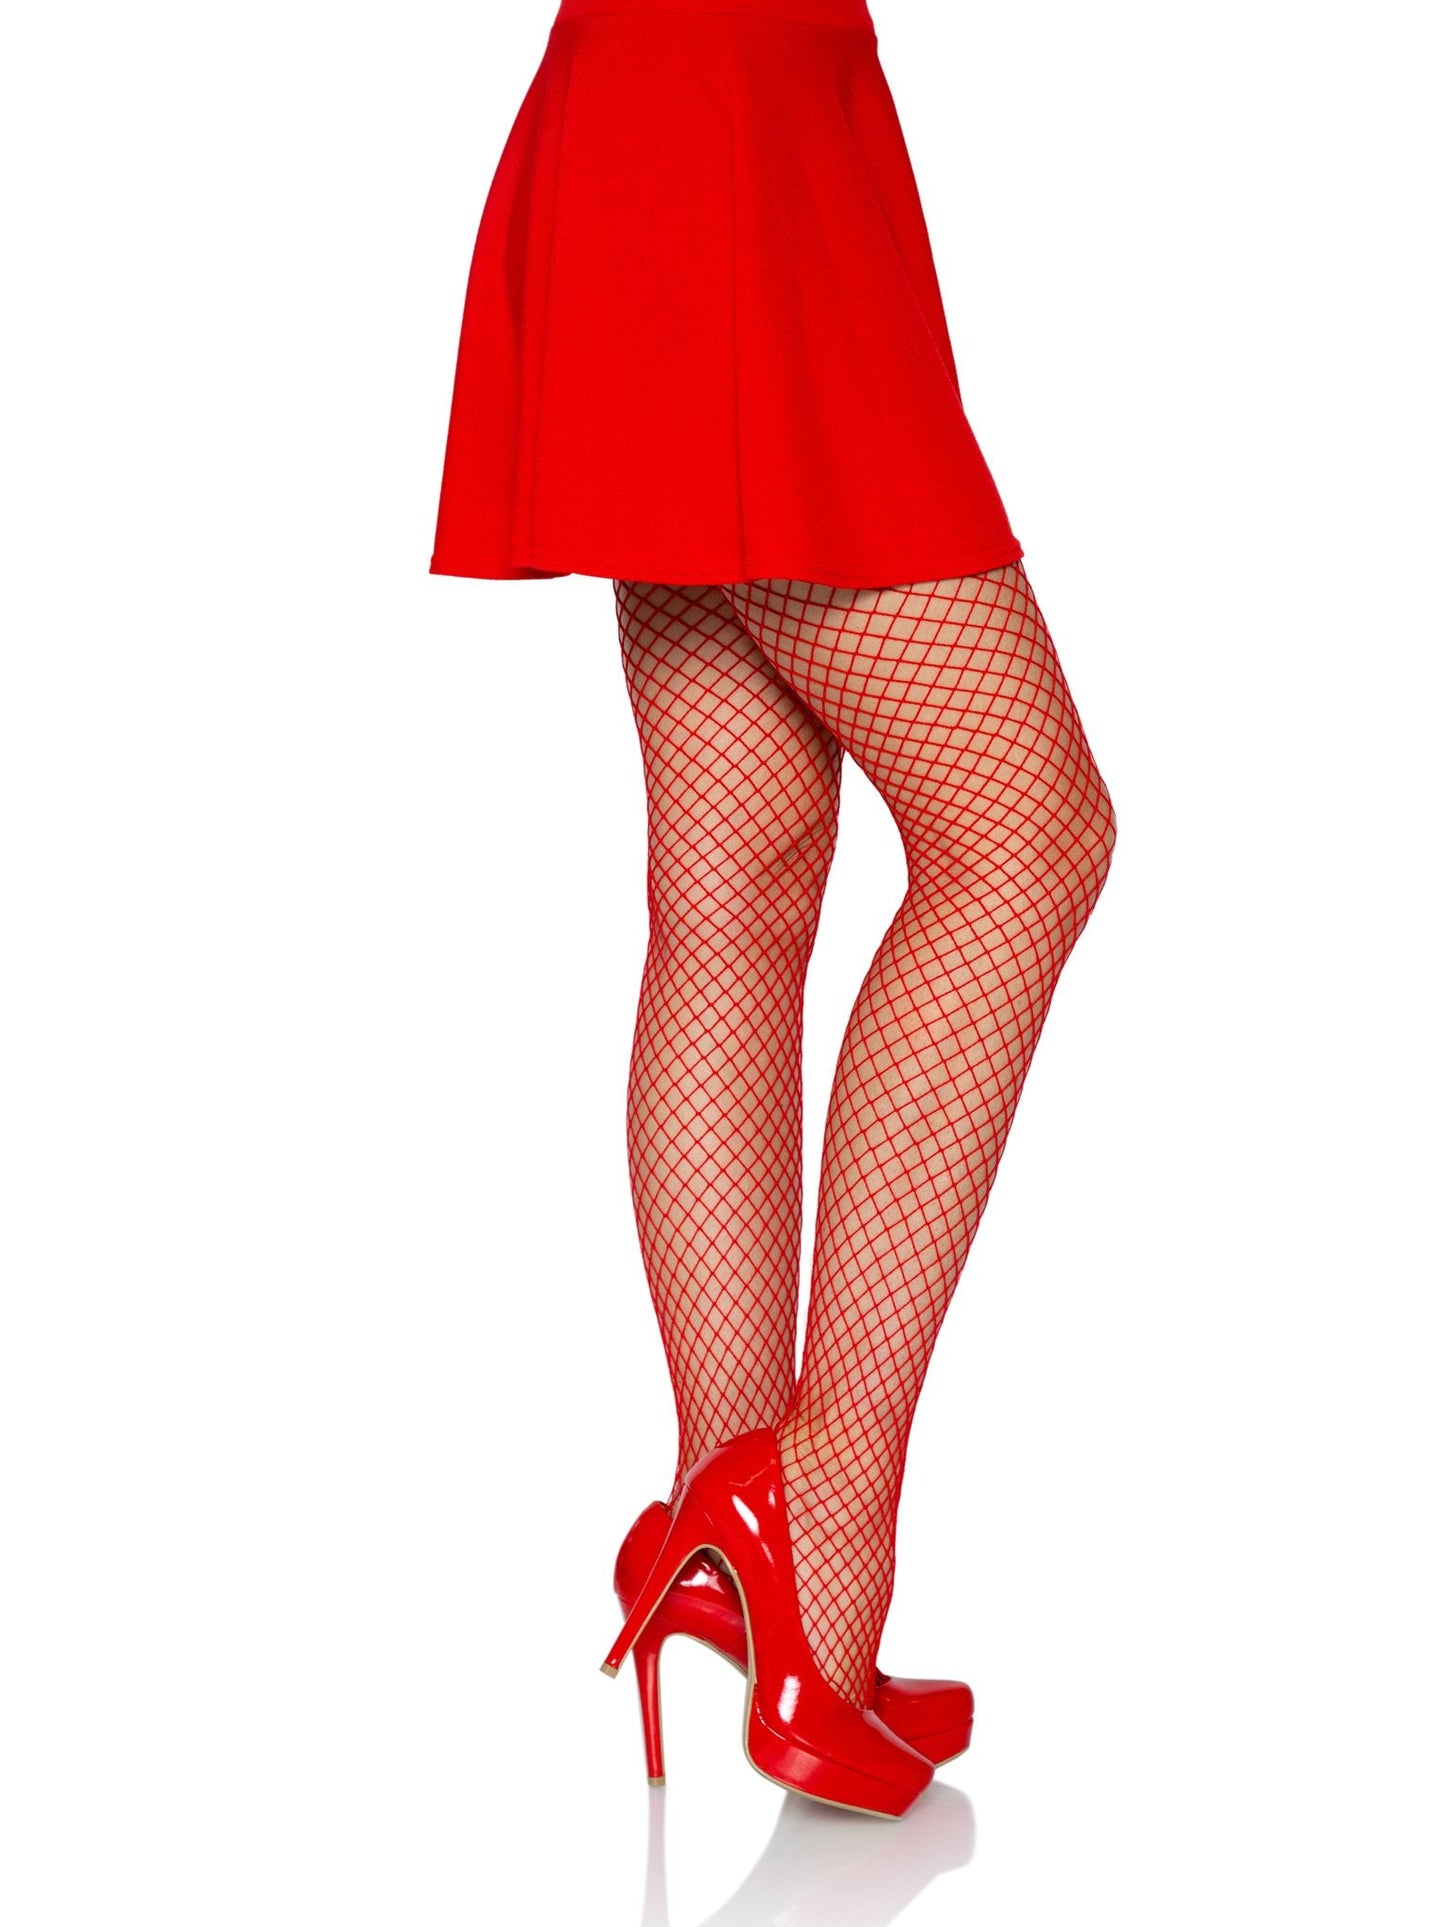 Spandex Industrial Net Pantyhose in red on model, right side view.